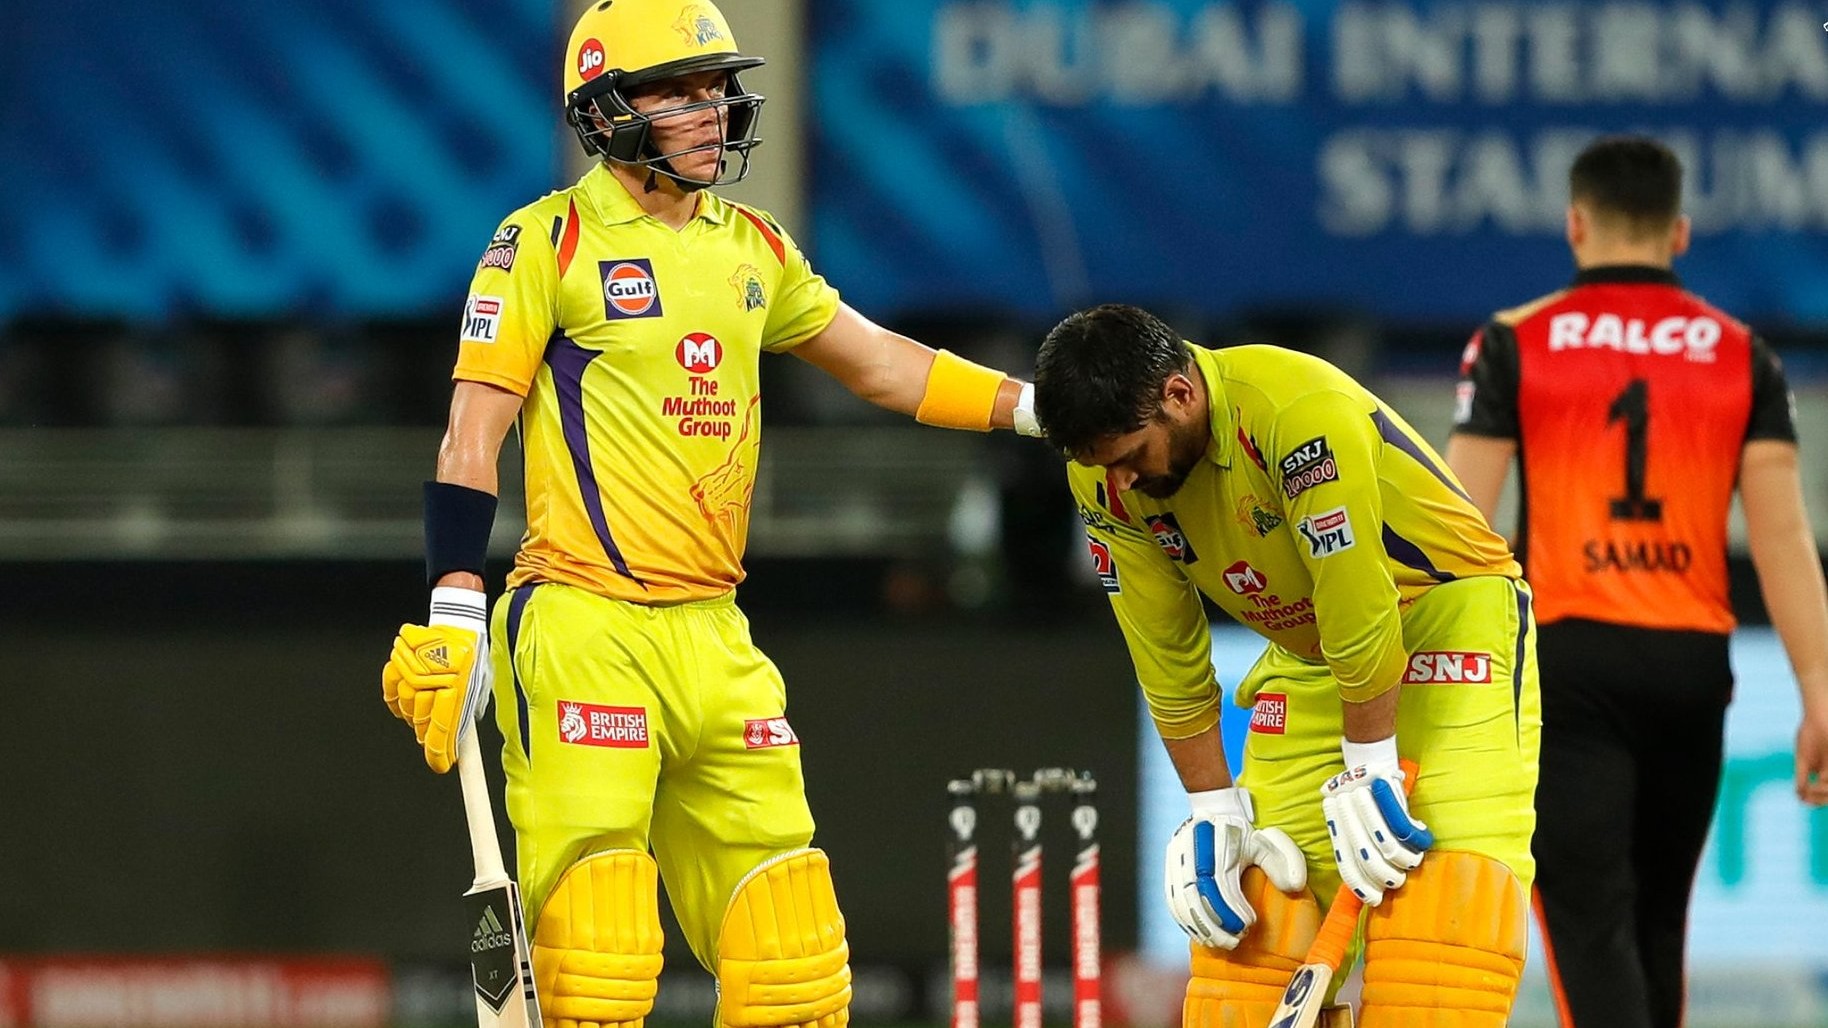 IPL 2020: ‘Was trying to hit too hard’, admits Dhoni after failing to finish a chase for CSK against SRH